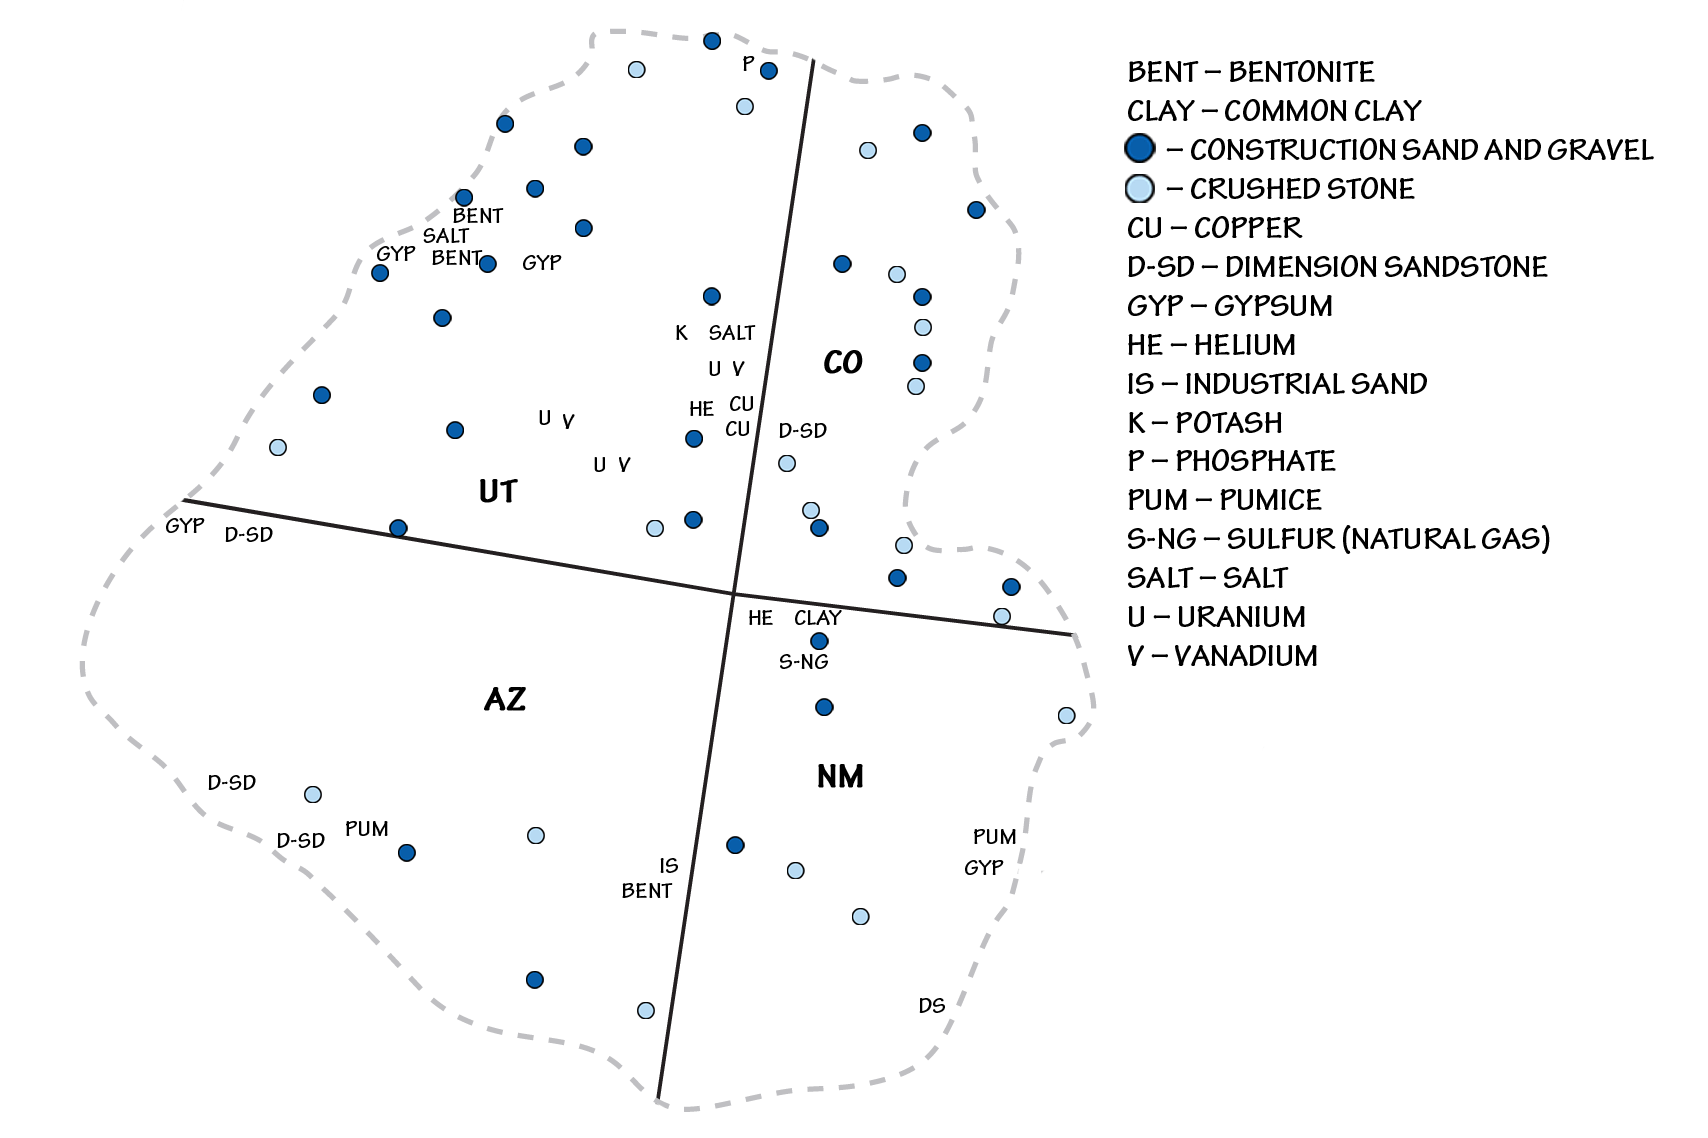 Map showing the locations of varied mineral resources in the Colorado Plateau region of the southwestern U.S.